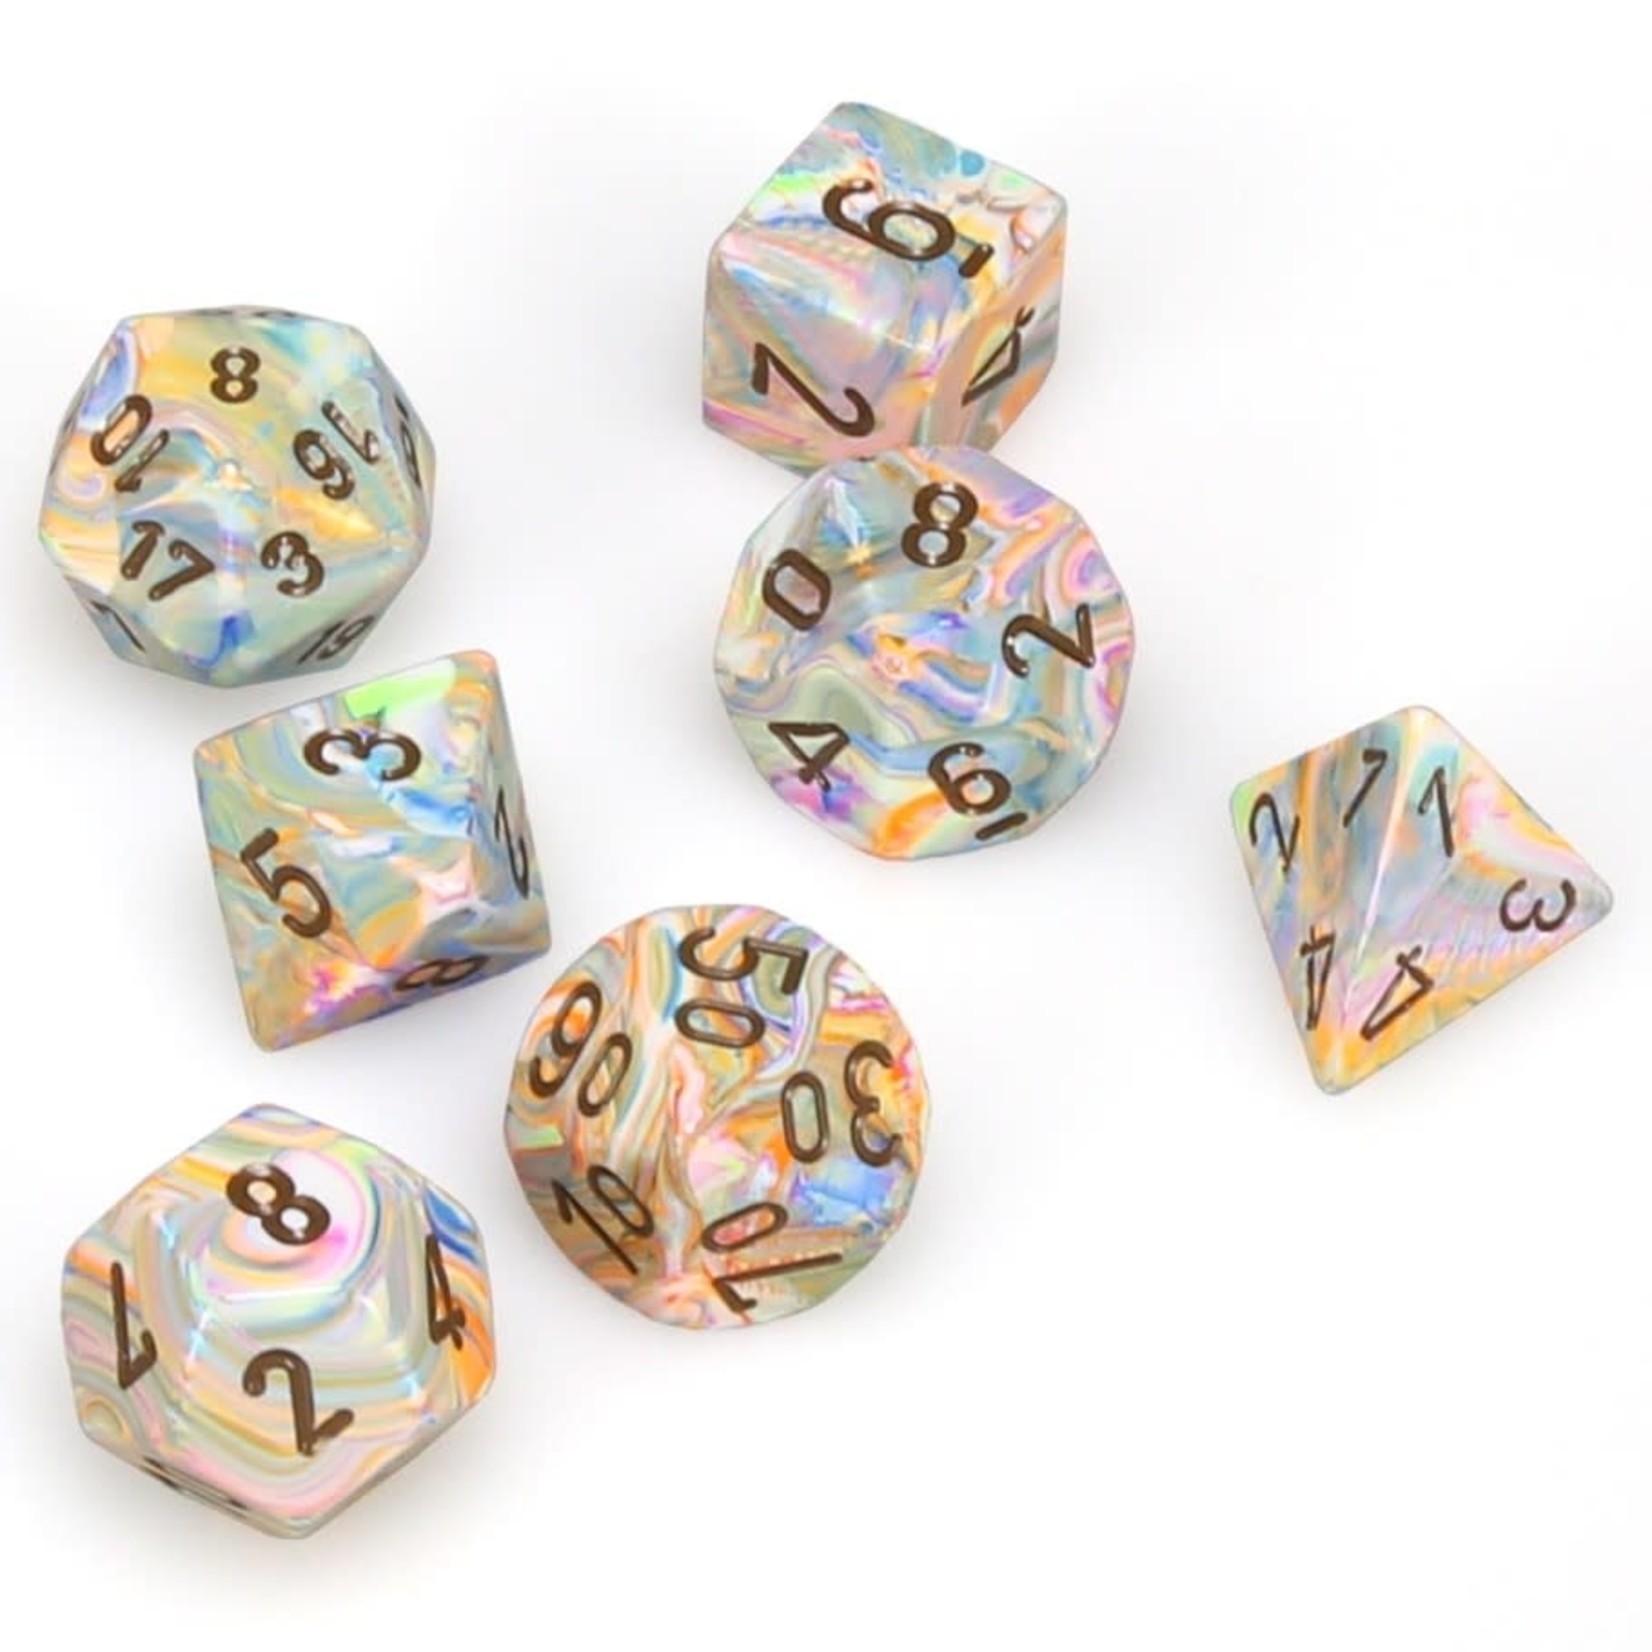 Chessex Chessex Festive Vibrant with Brown Polyhedral 7 die set